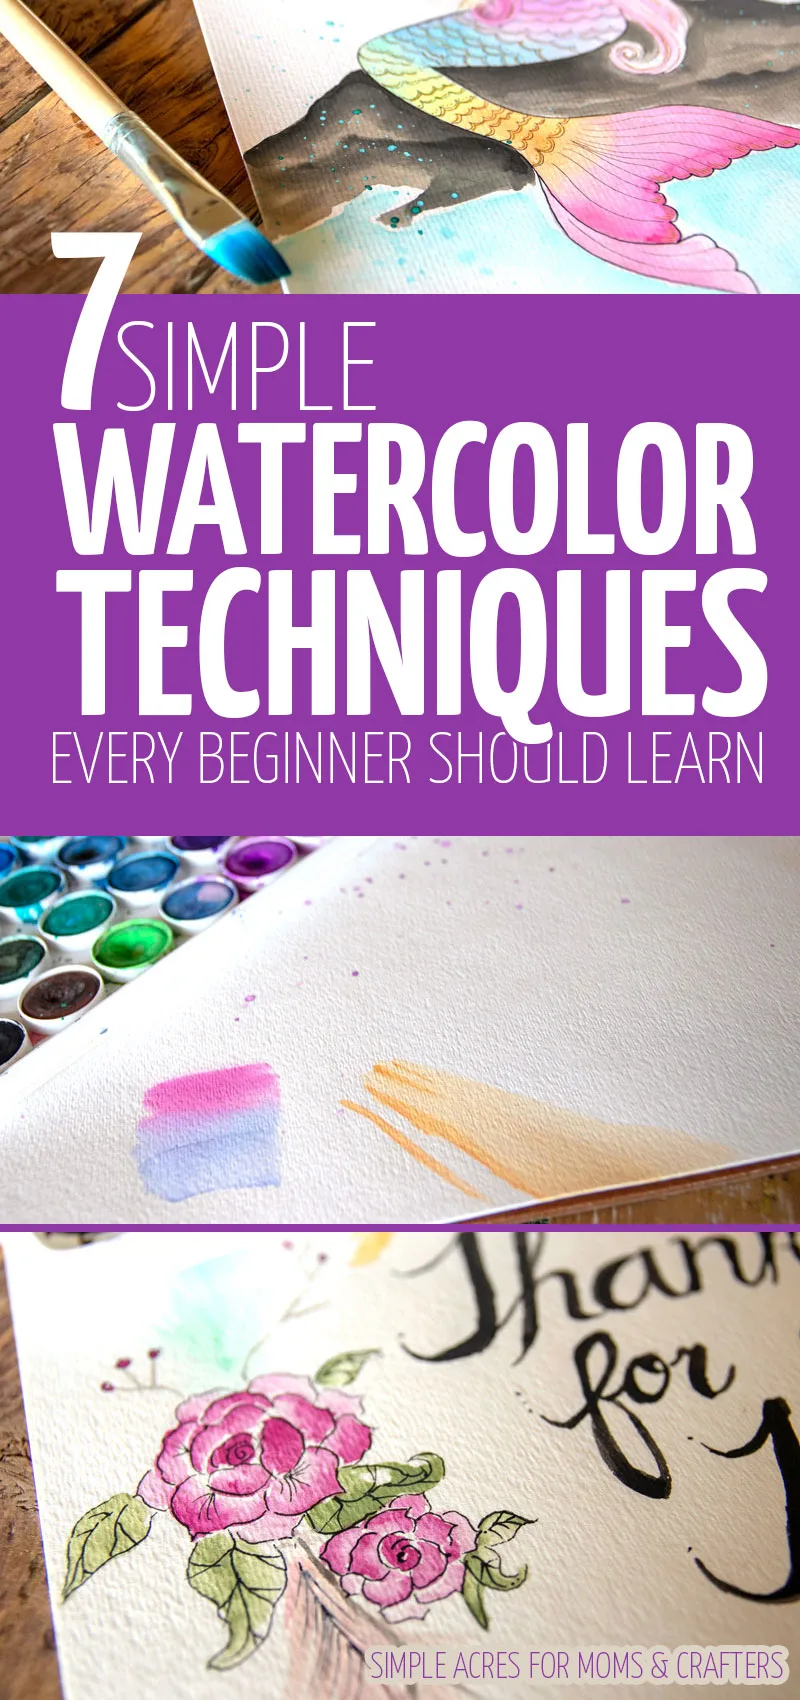 Click for some basic watercolor techniques for beginners! If you're learning how to watercolor, this list has everything you need to teach yourself #watercolor #art #momsandcrafters